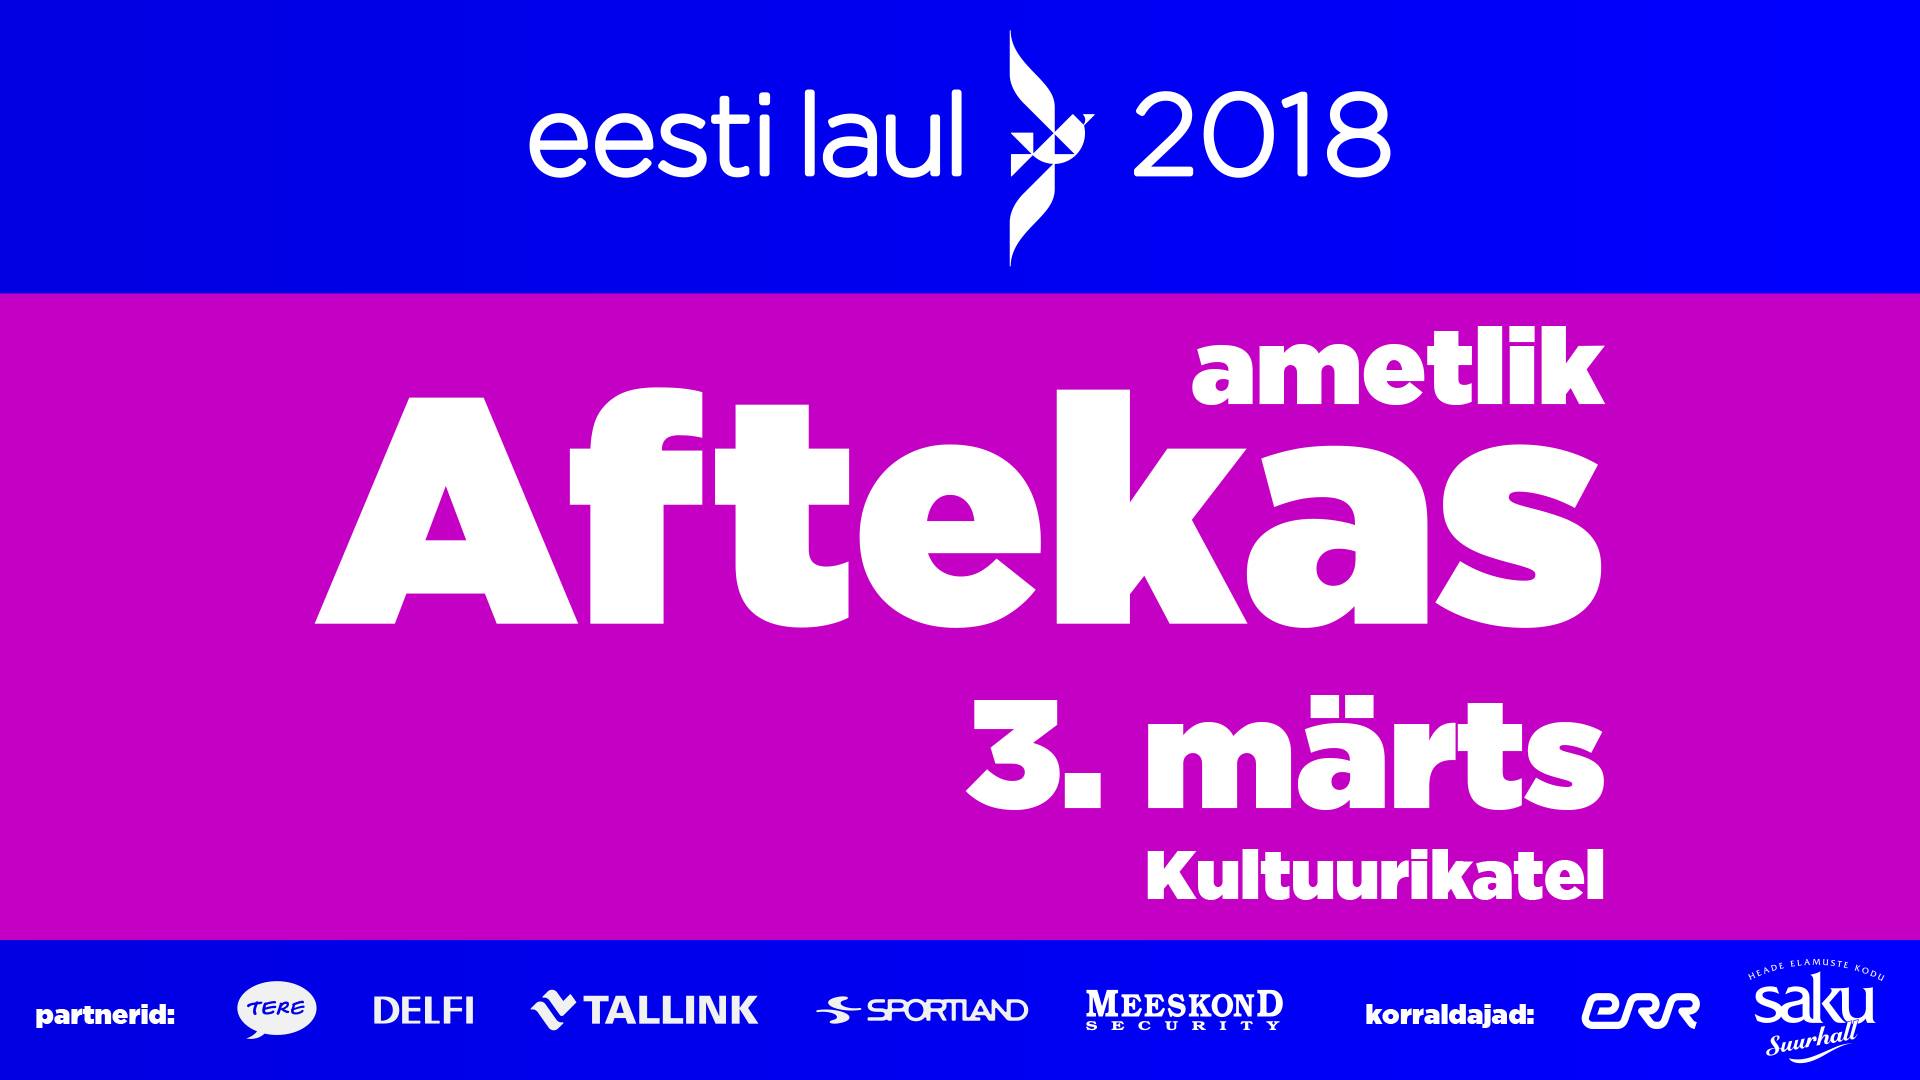 6530Official AFTERPARTY of “Eesti laul 2018”